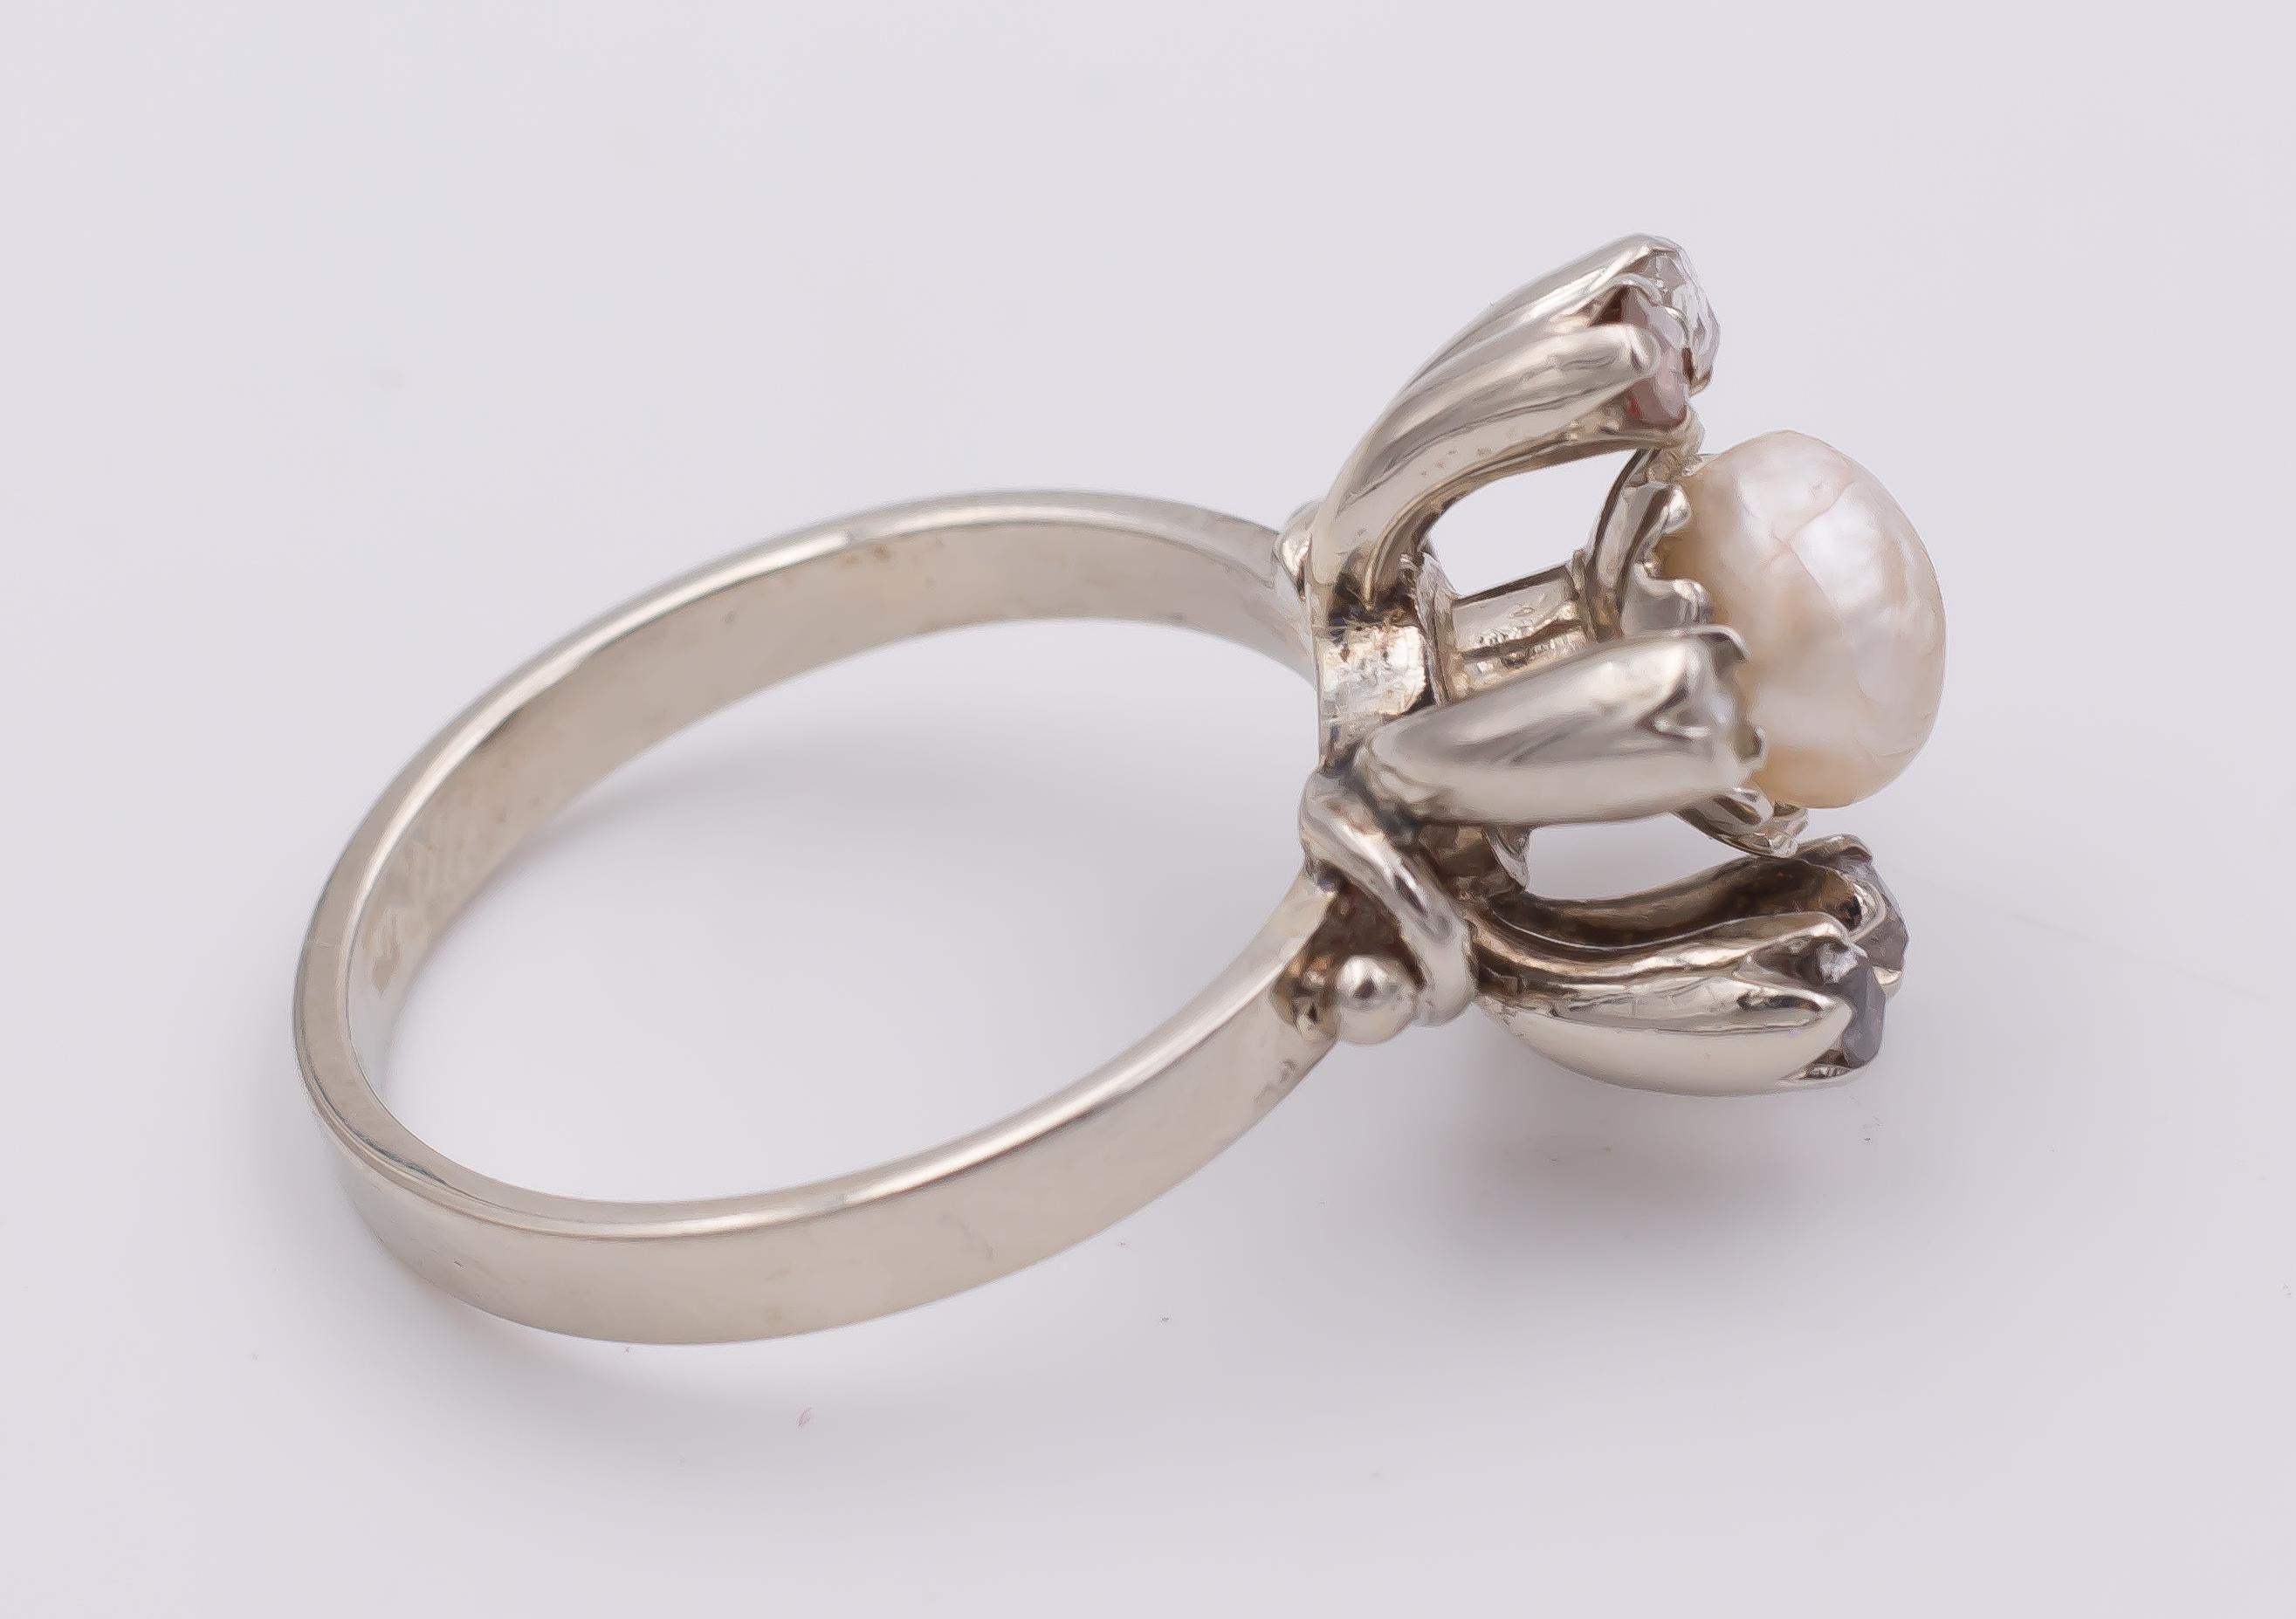 This fine and elegant ring has a beautiful flower shape: it is set with a central pearl, surrounded by six petals, the rose cut diamonds in a gold mount.
The ring is crafted in white gold throughout and dates from the 1930s. 

MATERIALS
White gold,